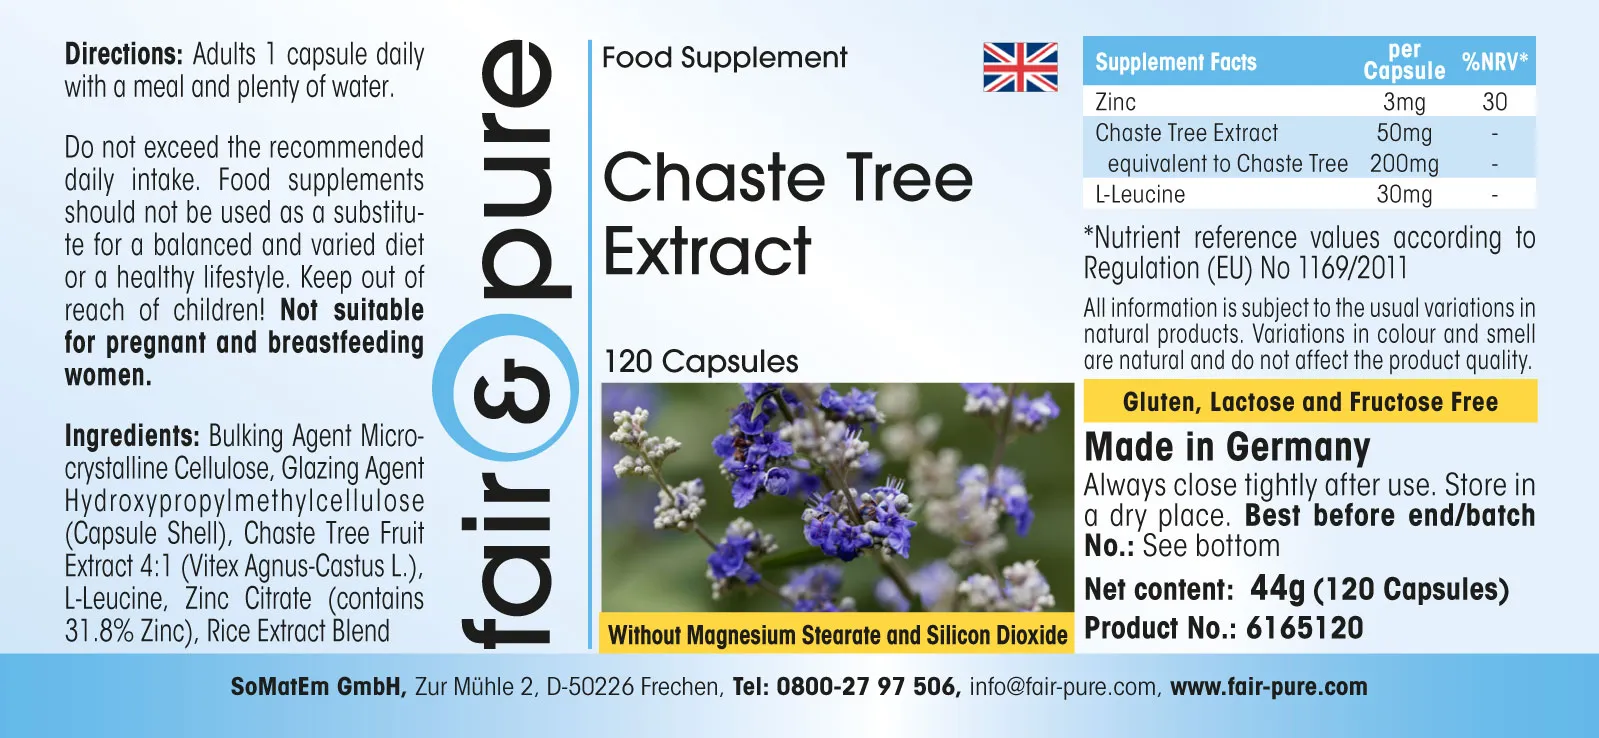 Chaste Tree Extract with Zinc